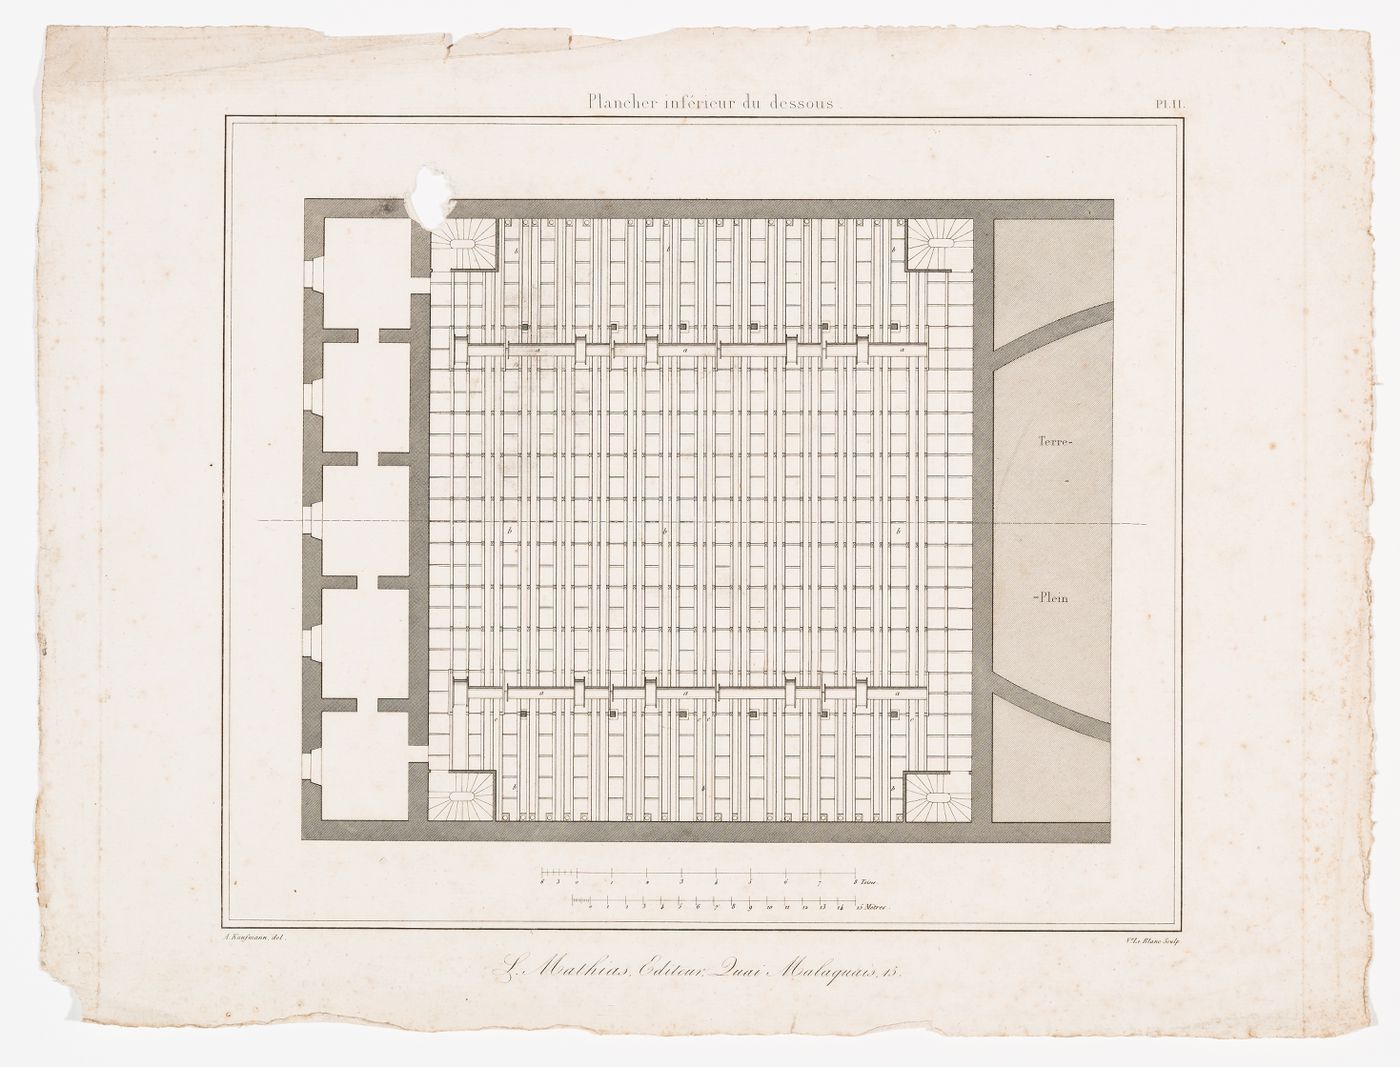 Framing plan of a basement, probably of Salle Le Peletier